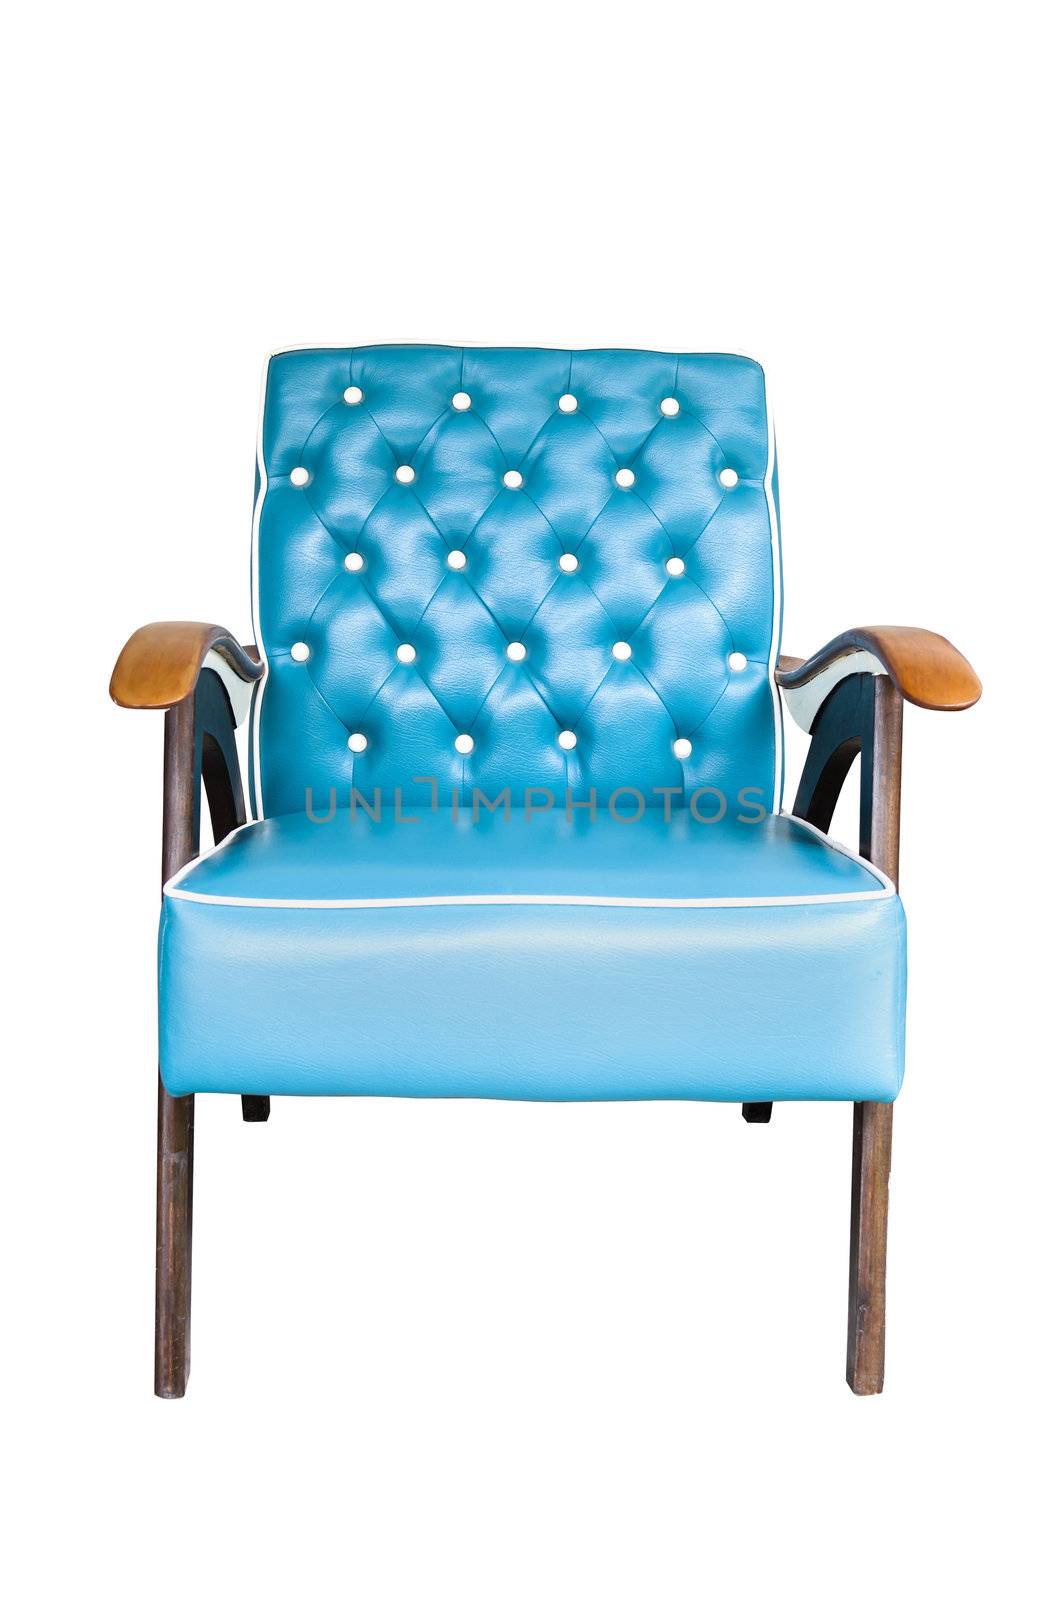 Blue vintage arm chair  isolated on white background